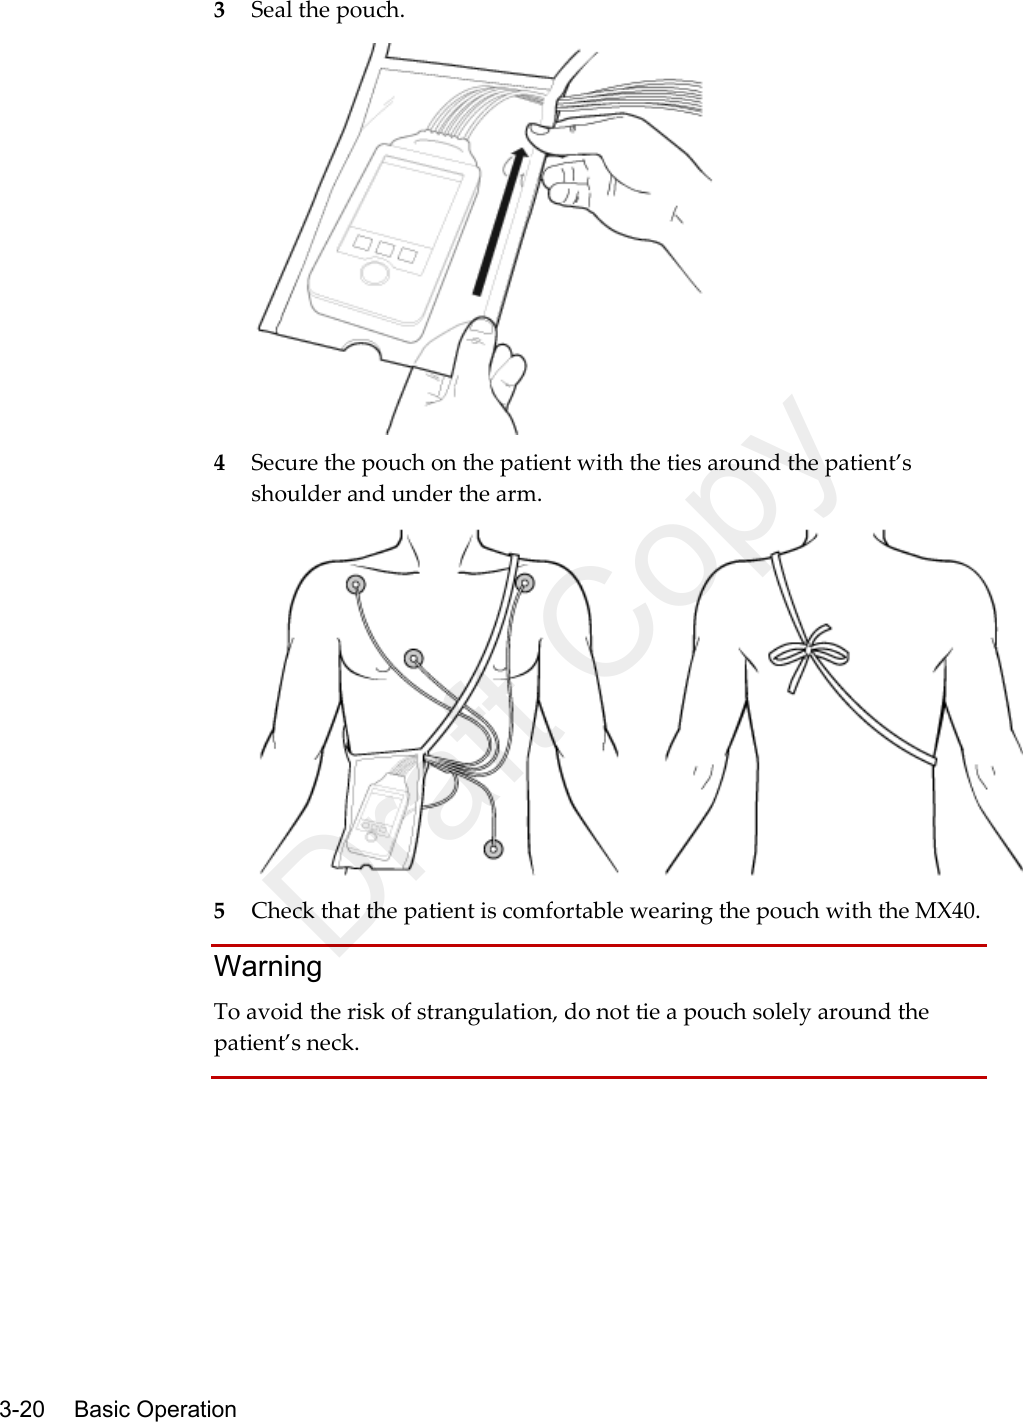    3-20    Basic Operation  3 Seal the pouch.  4 Secure the pouch on the patient with the ties around the patient’s shoulder and under the arm.  5 Check that the patient is comfortable wearing the pouch with the MX40.   Warning To avoid the risk of strangulation, do not tie a pouch solely around the patient’s neck.   Draft Copy